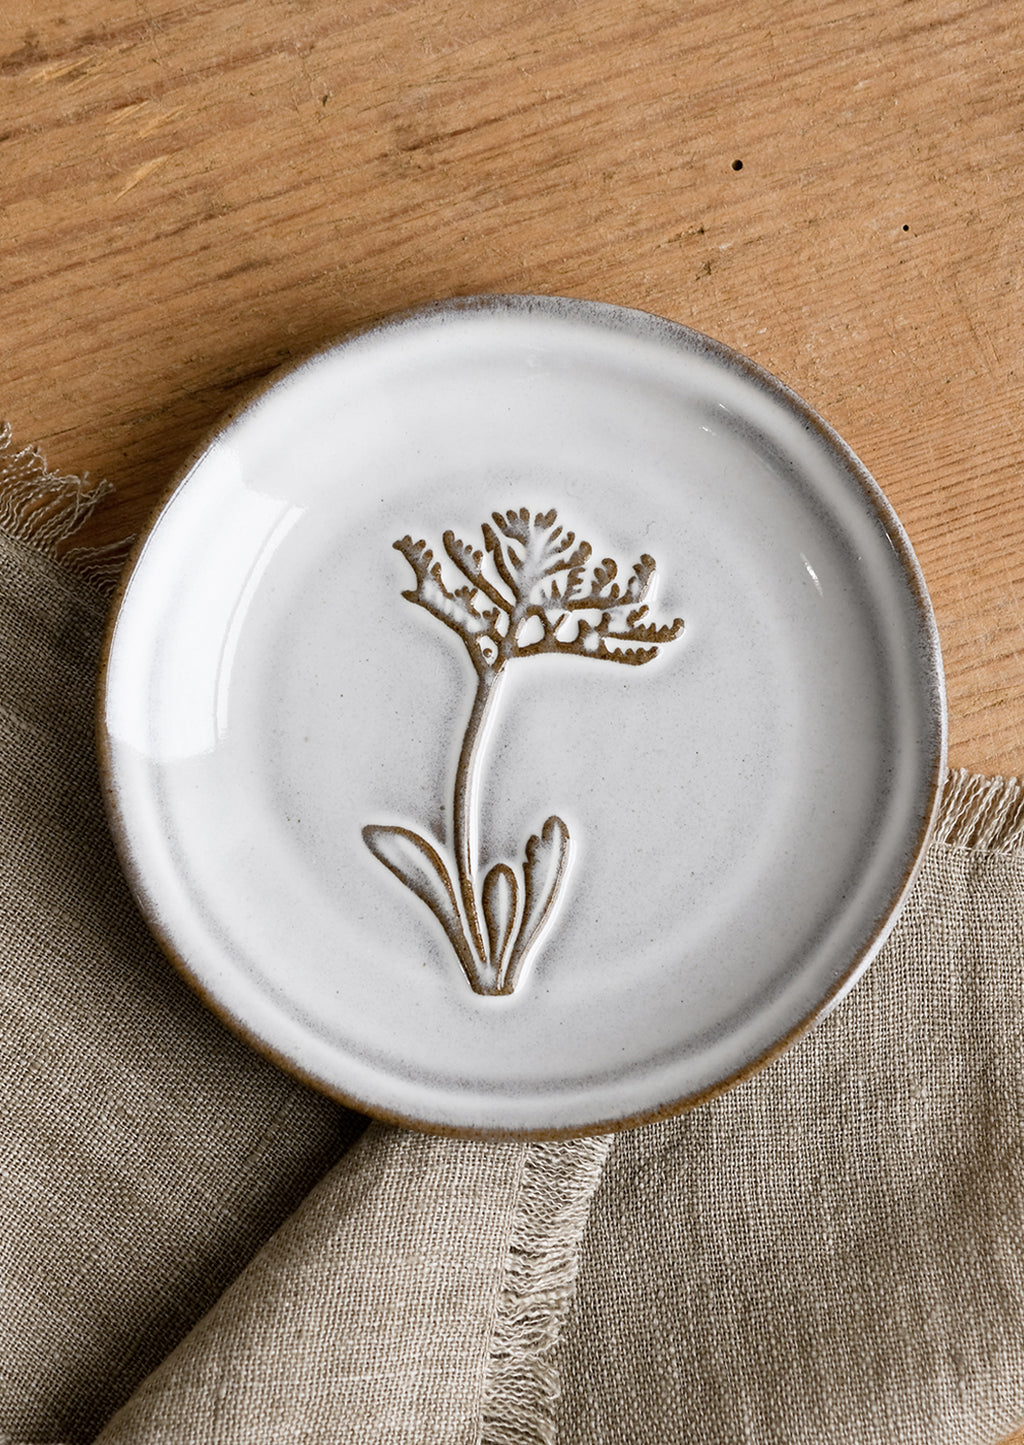 Dusty Miller: A grey glazed brown clay mini plate with raised flower design.